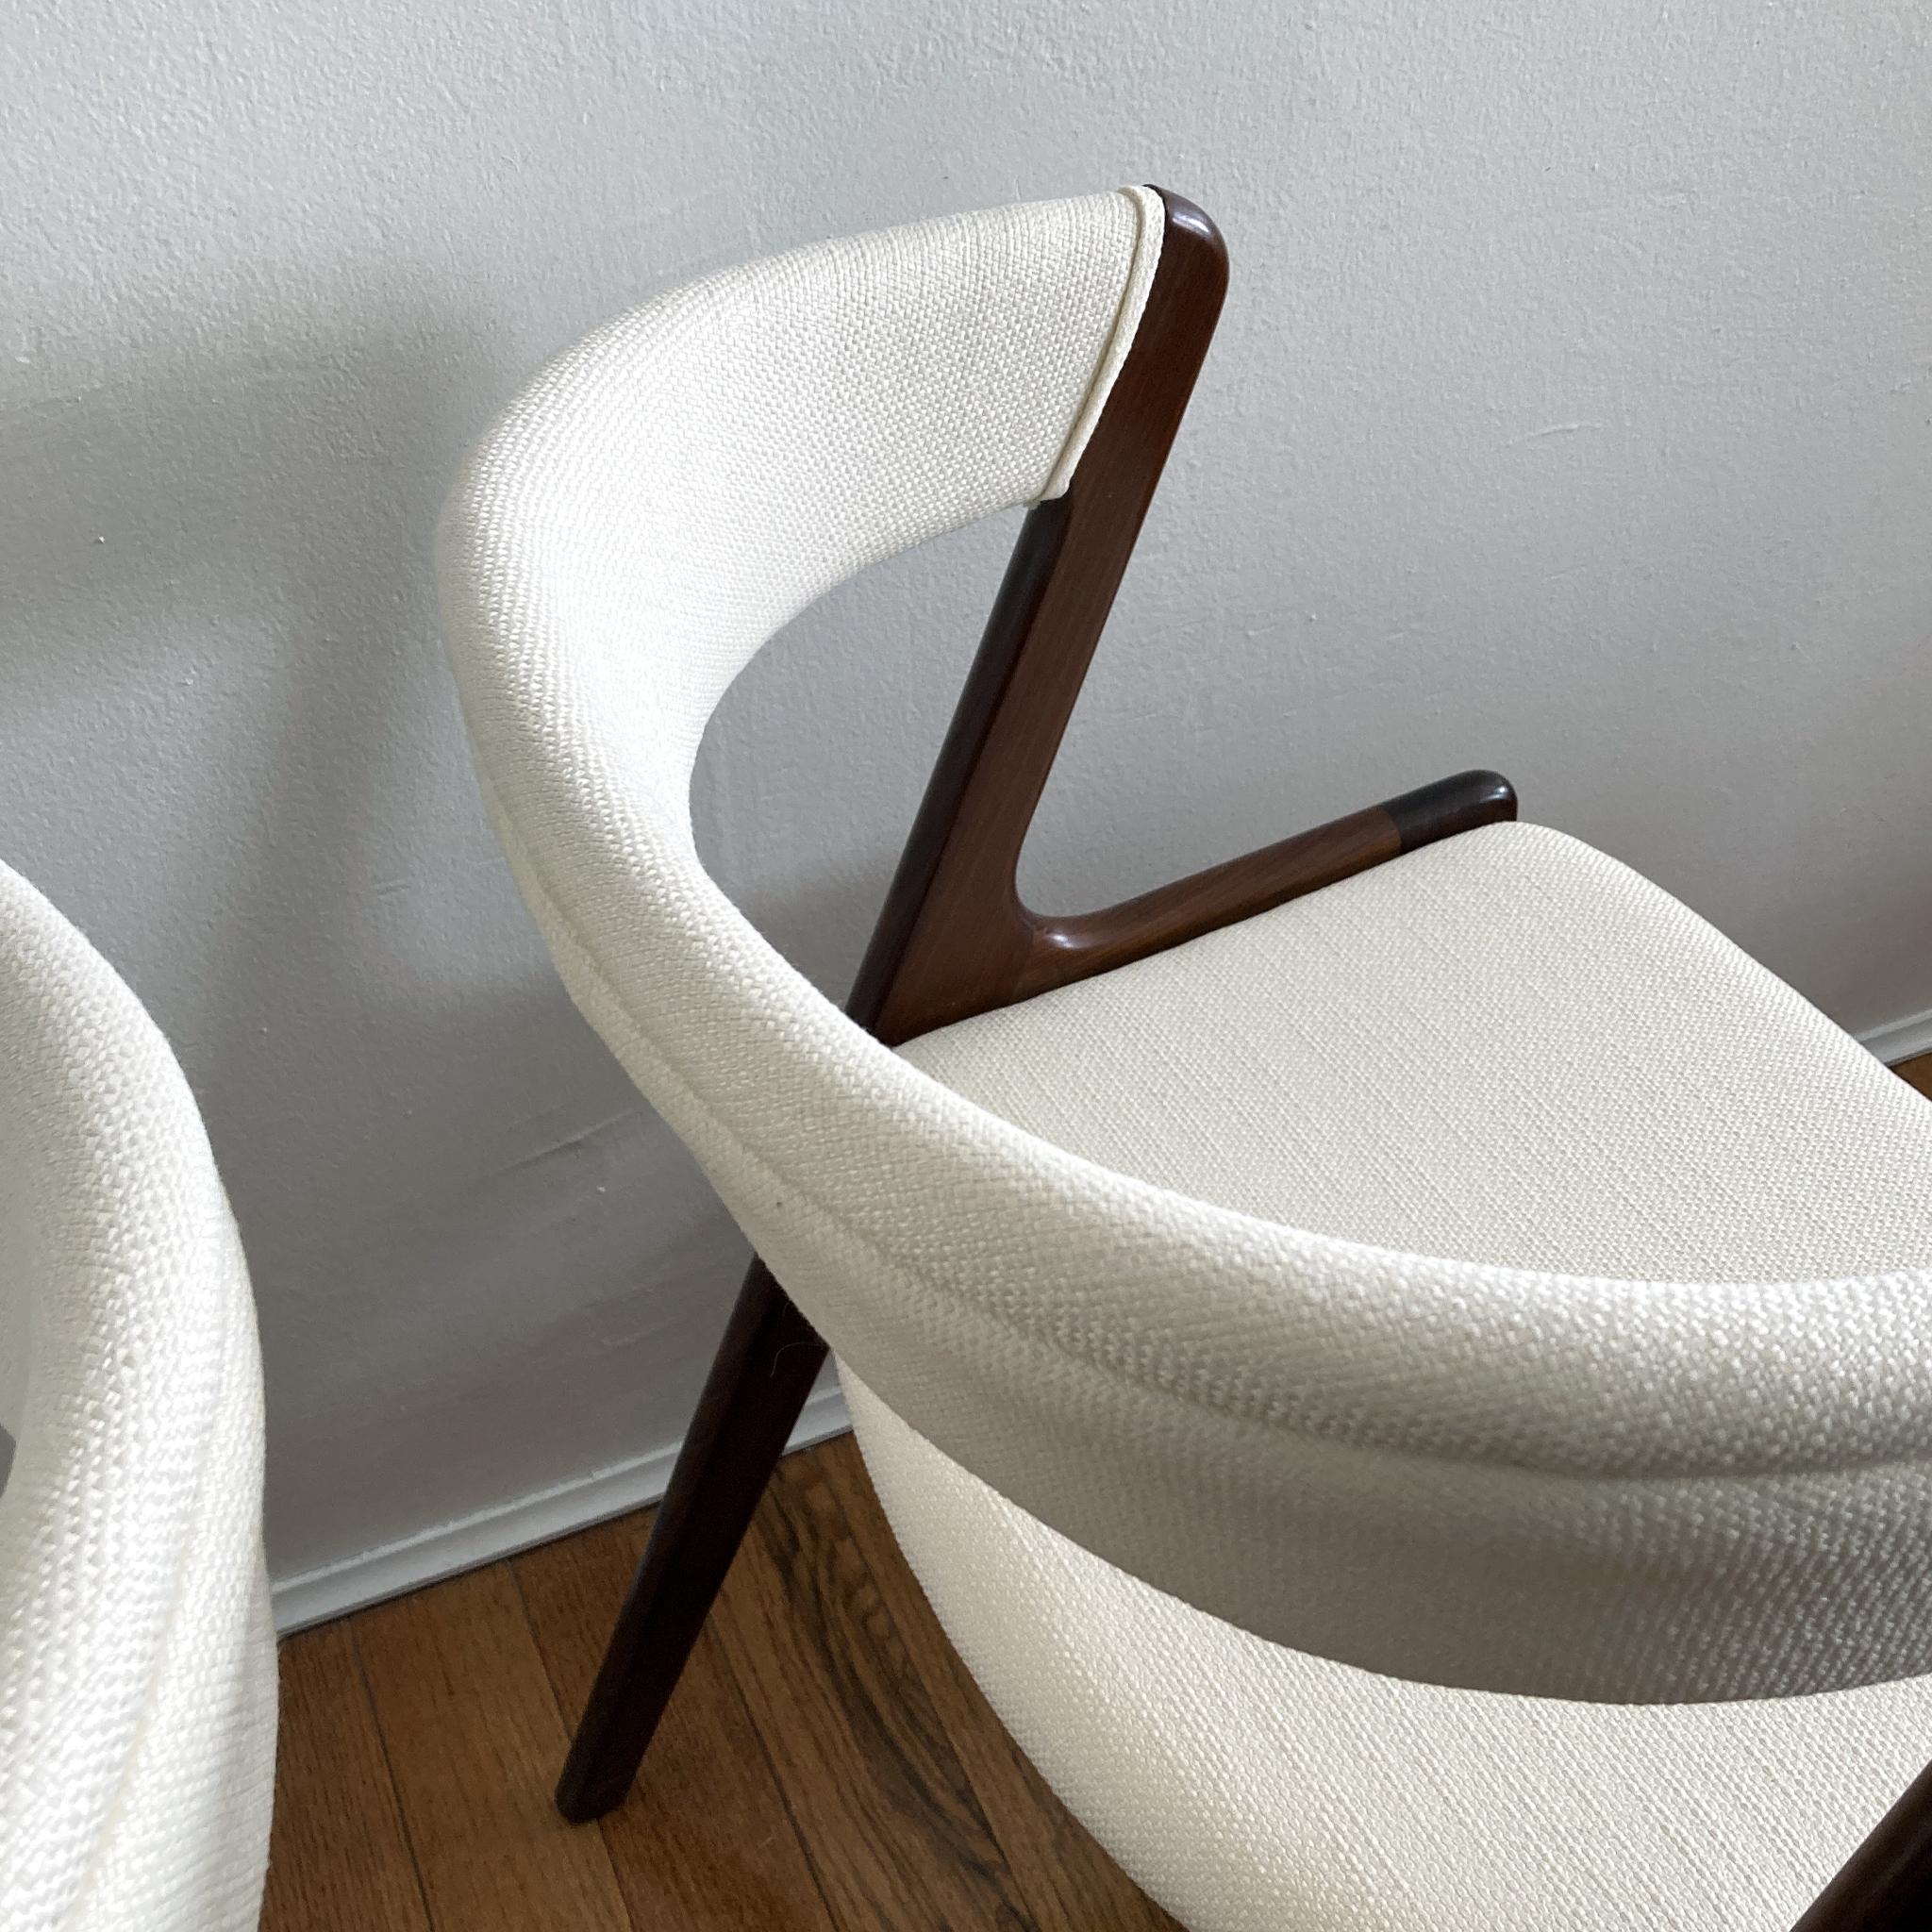 Kai Kristiansen Ivory Tweed Curved Back Teak Chairs, Danish, 1960s, Pair of Two For Sale 5